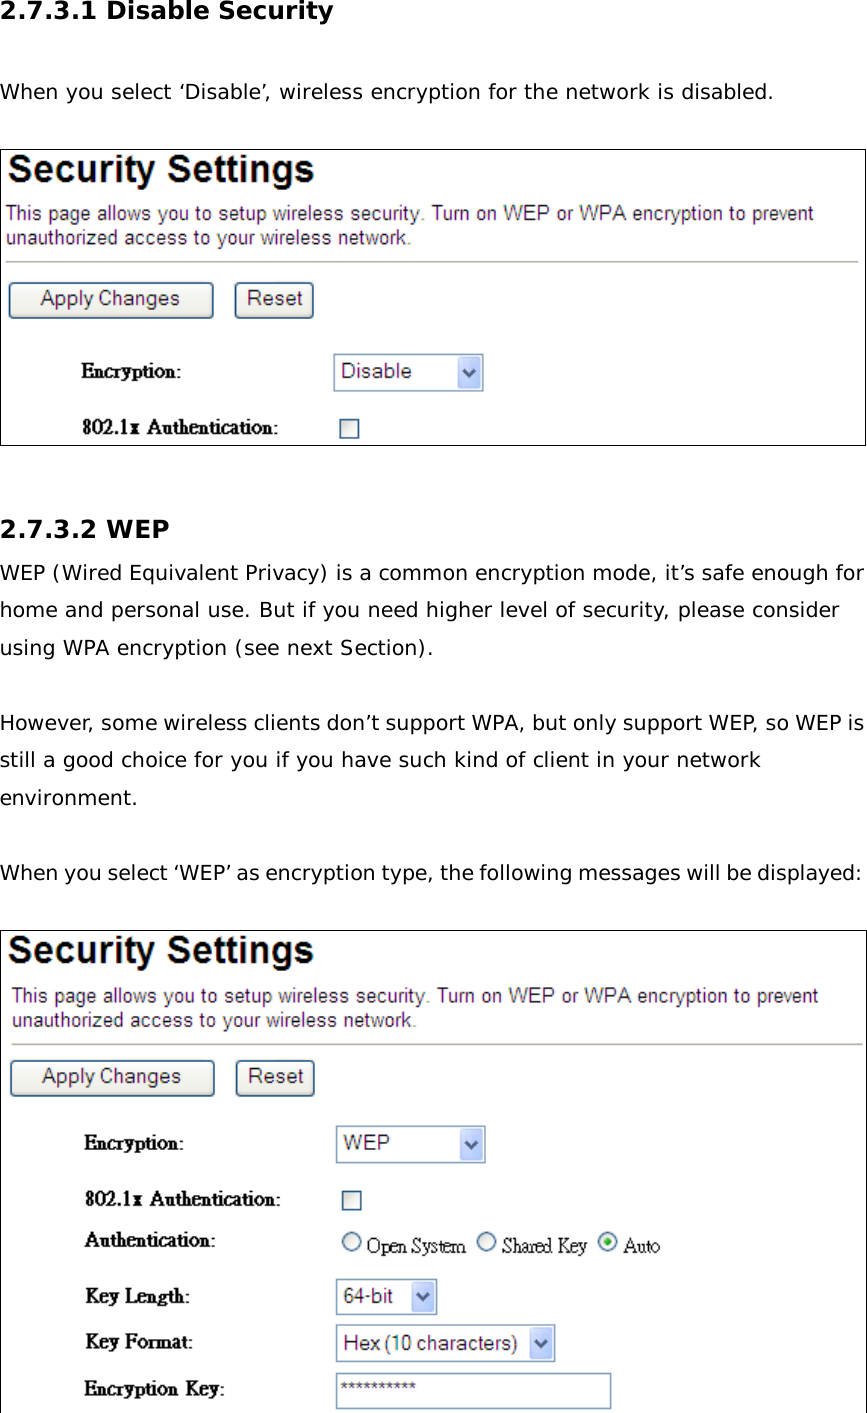 2.7.3.1 Disable Security  When you select ‘Disable’, wireless encryption for the network is disabled.    2.7.3.2 WEP WEP (Wired Equivalent Privacy) is a common encryption mode, it’s safe enough for home and personal use. But if you need higher level of security, please consider using WPA encryption (see next Section).   However, some wireless clients don’t support WPA, but only support WEP, so WEP is still a good choice for you if you have such kind of client in your network environment.  When you select ‘WEP’ as encryption type, the following messages will be displayed:   